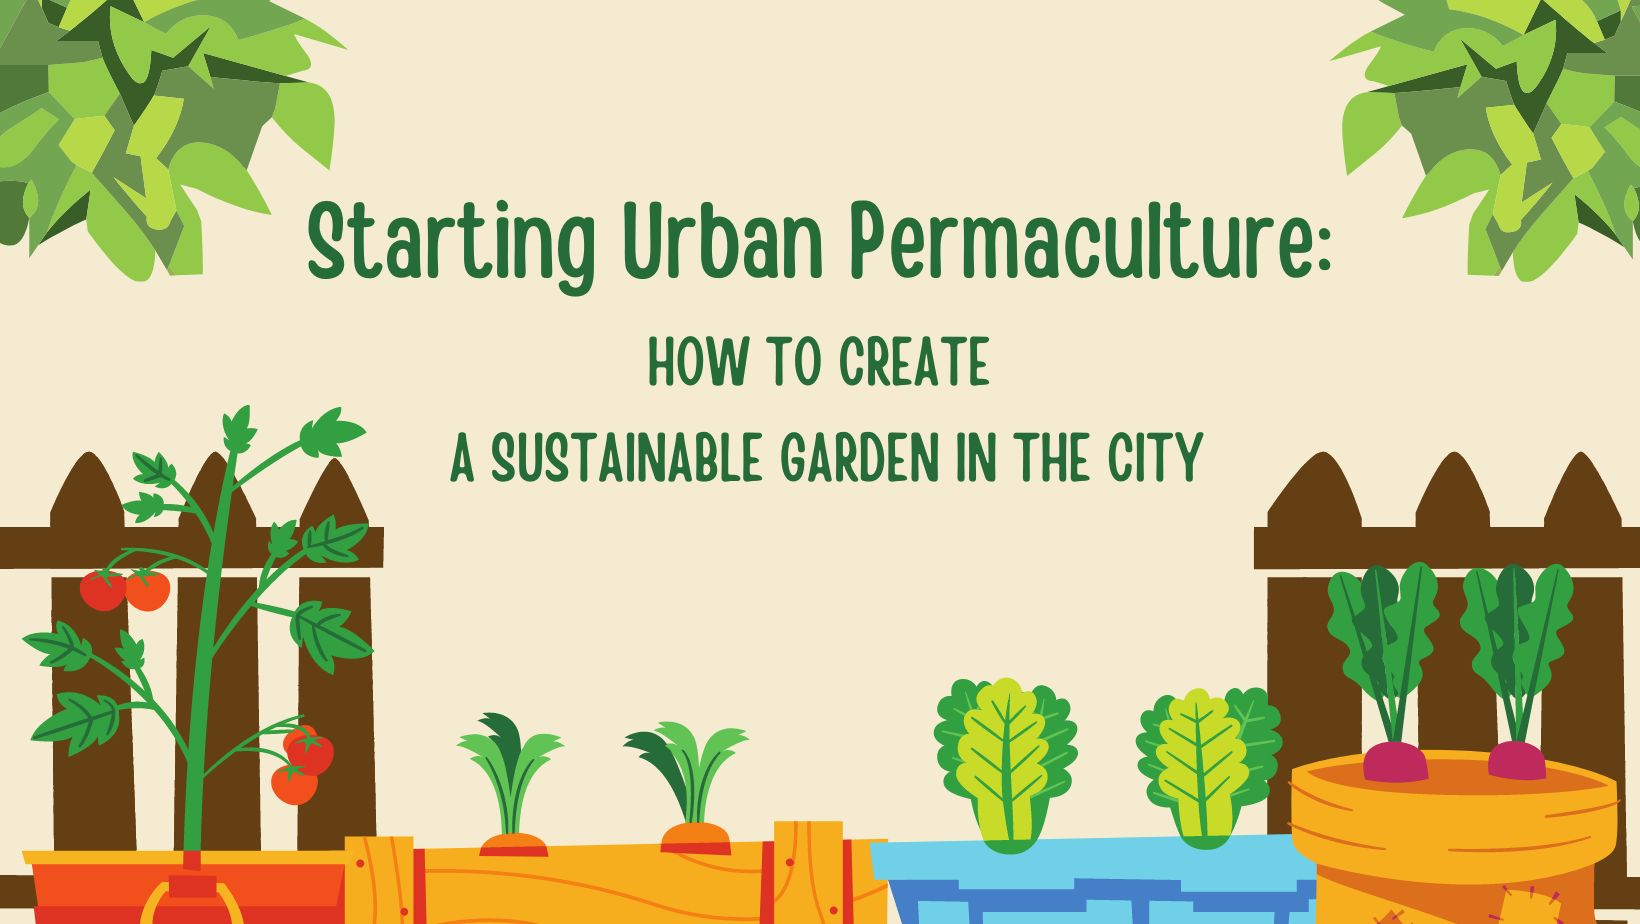 Starting Urban Permaculture: How to Create a Sustainable Garden in the City